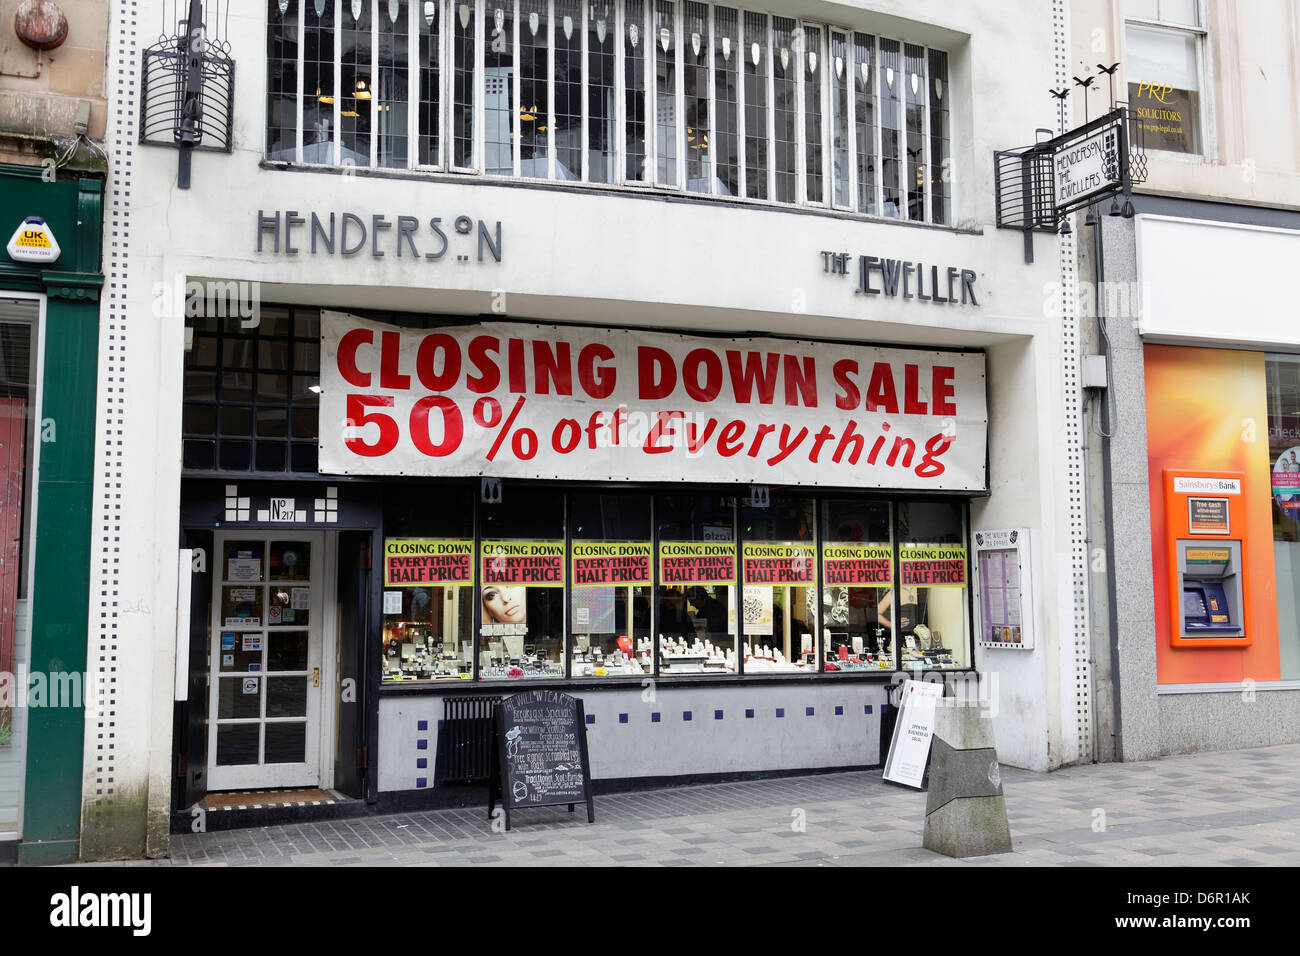 This store is permanently closed. Henderson The Jewellers Closing Down Sale sign, Sauchiehall Street, Glasgow city centre, Scotland, UK Stock Photo